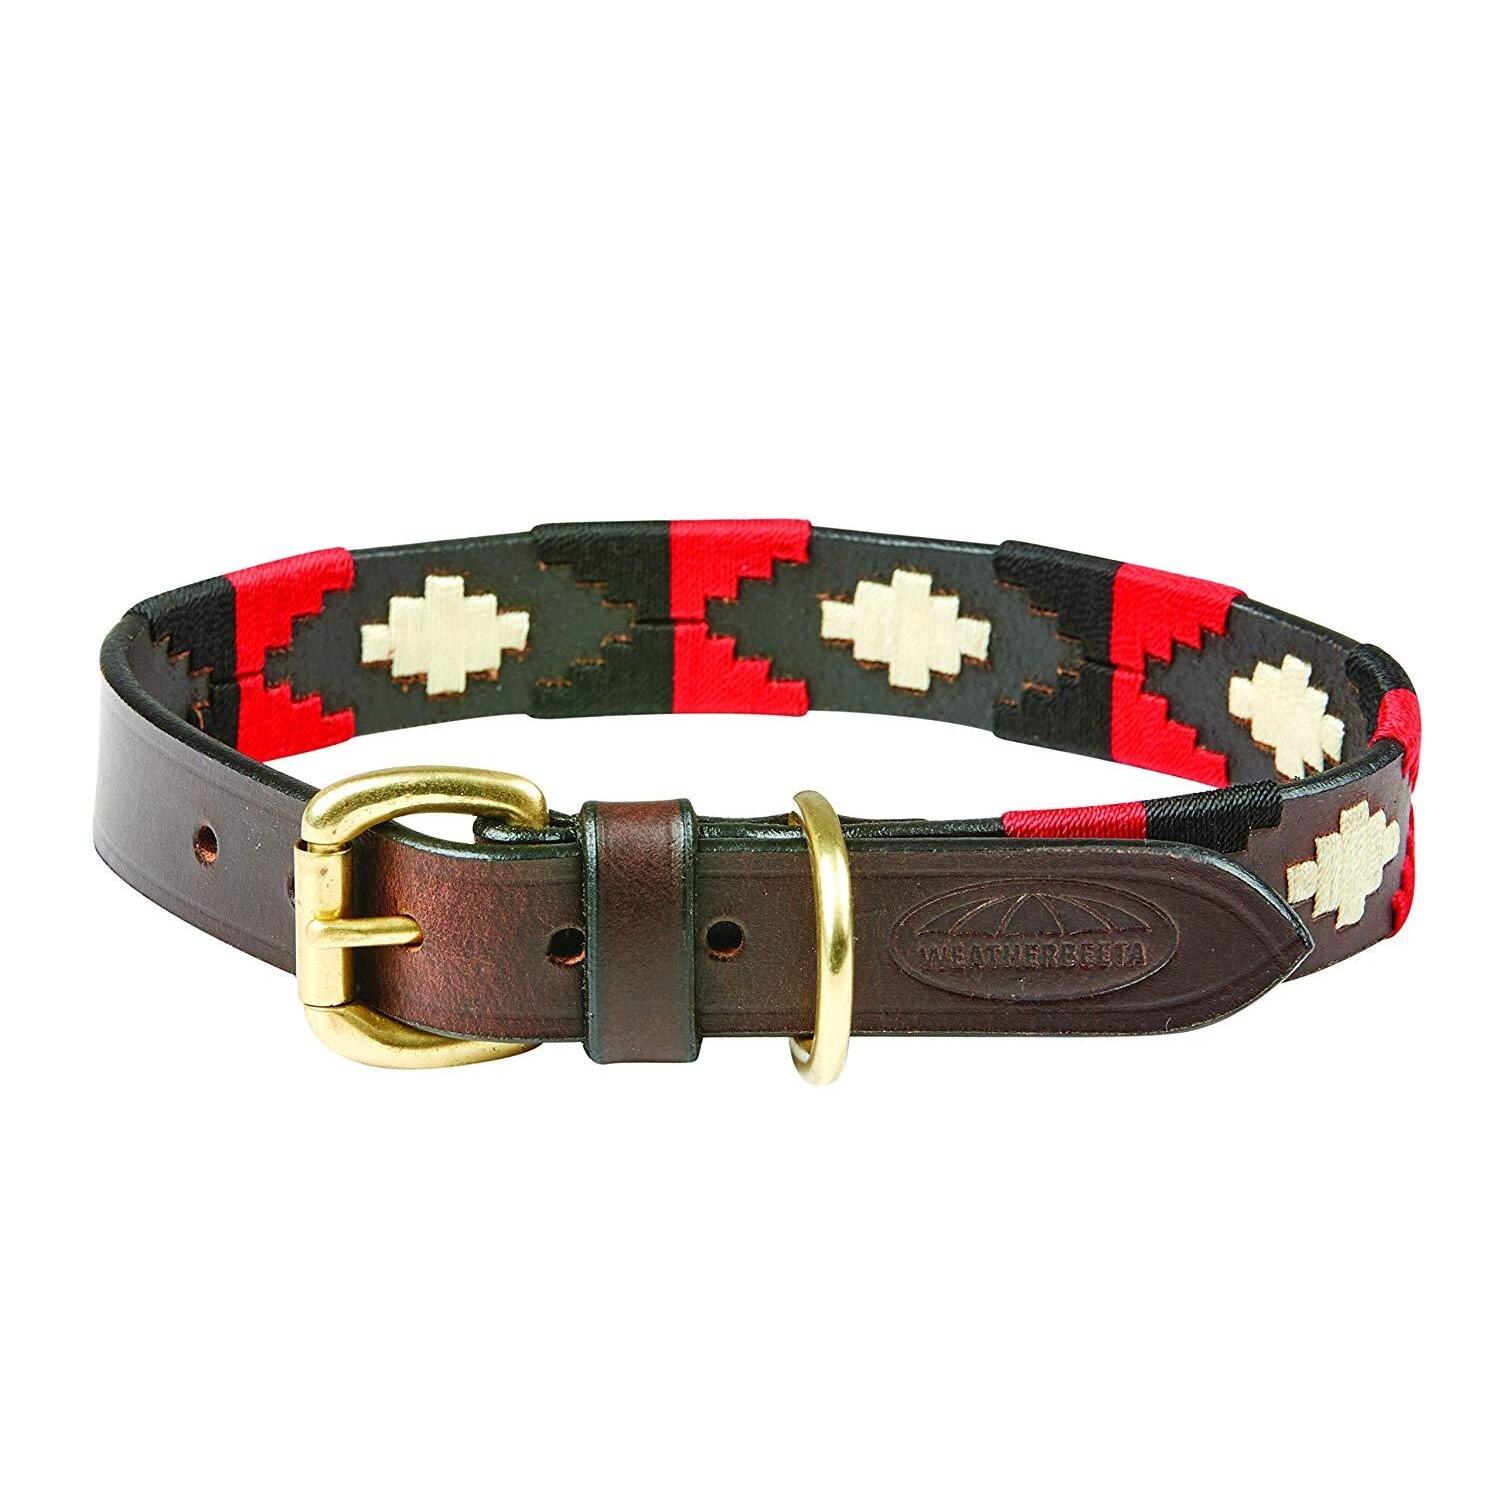 Polo Leather Dog Collar (Cowdray Brown/Black/Red/White) 1/2